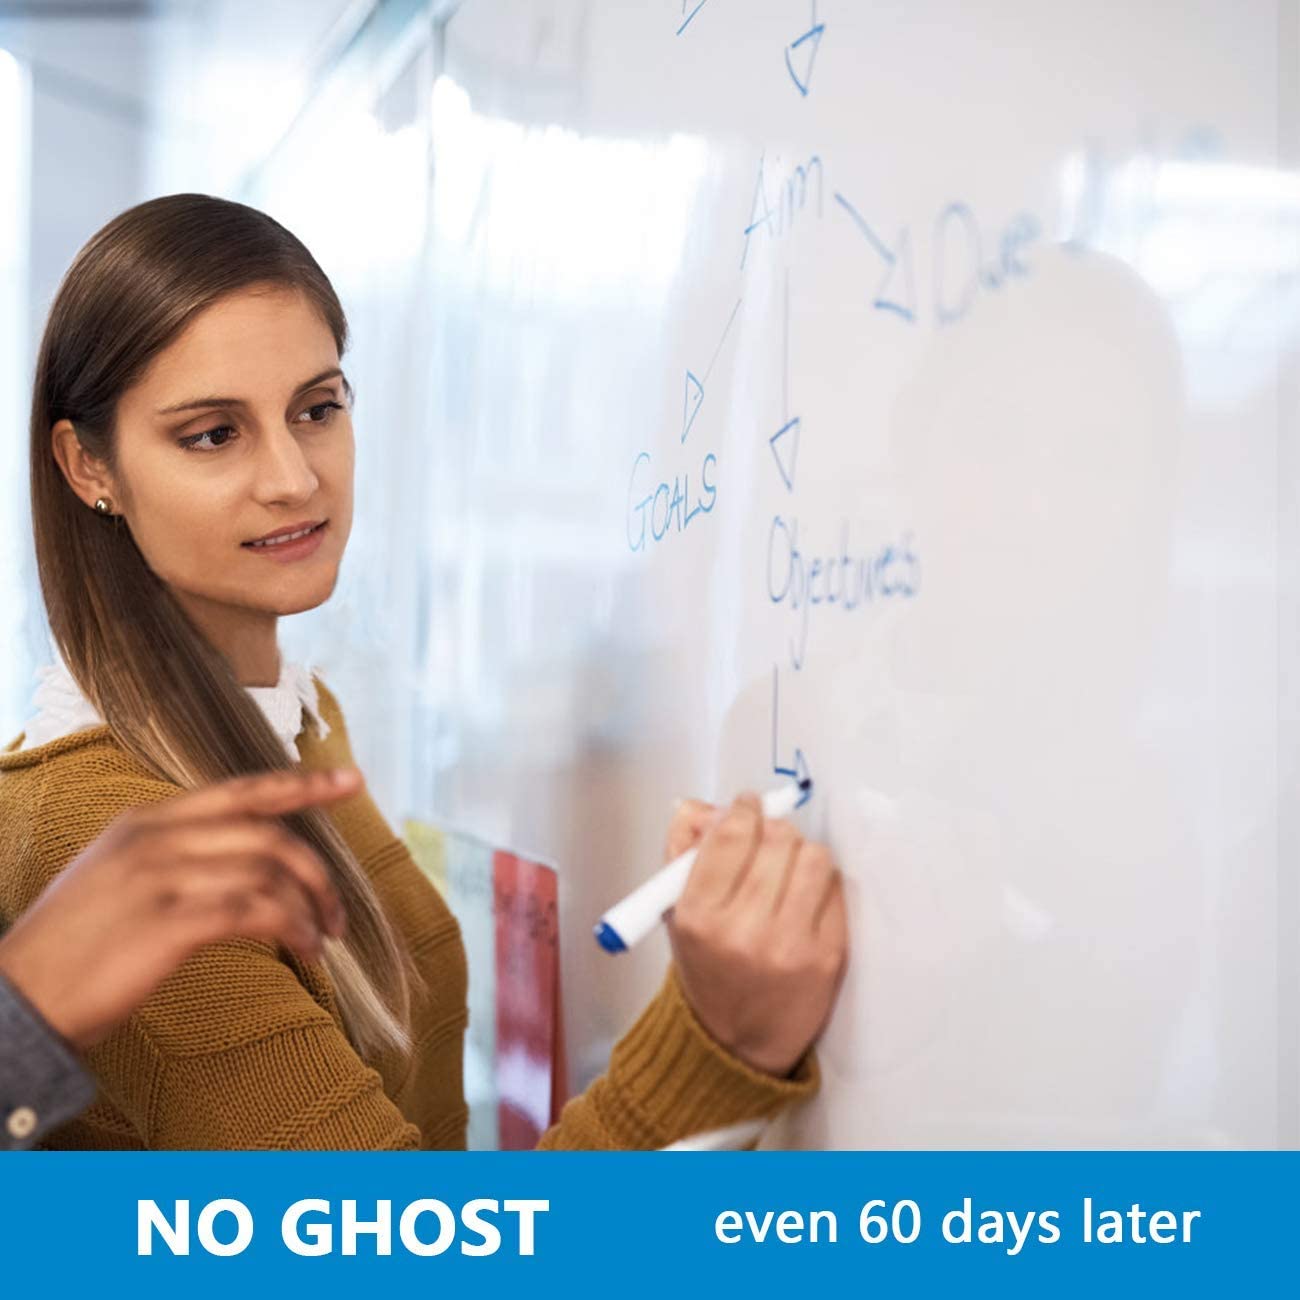 Dry Erase Board Paper, 6'x4' White Board Dry Erase Sticker, Large Stick on  Whiteboard Wallpaper, Stain-Proof & Super Sticky, No Ghost After 60 Days